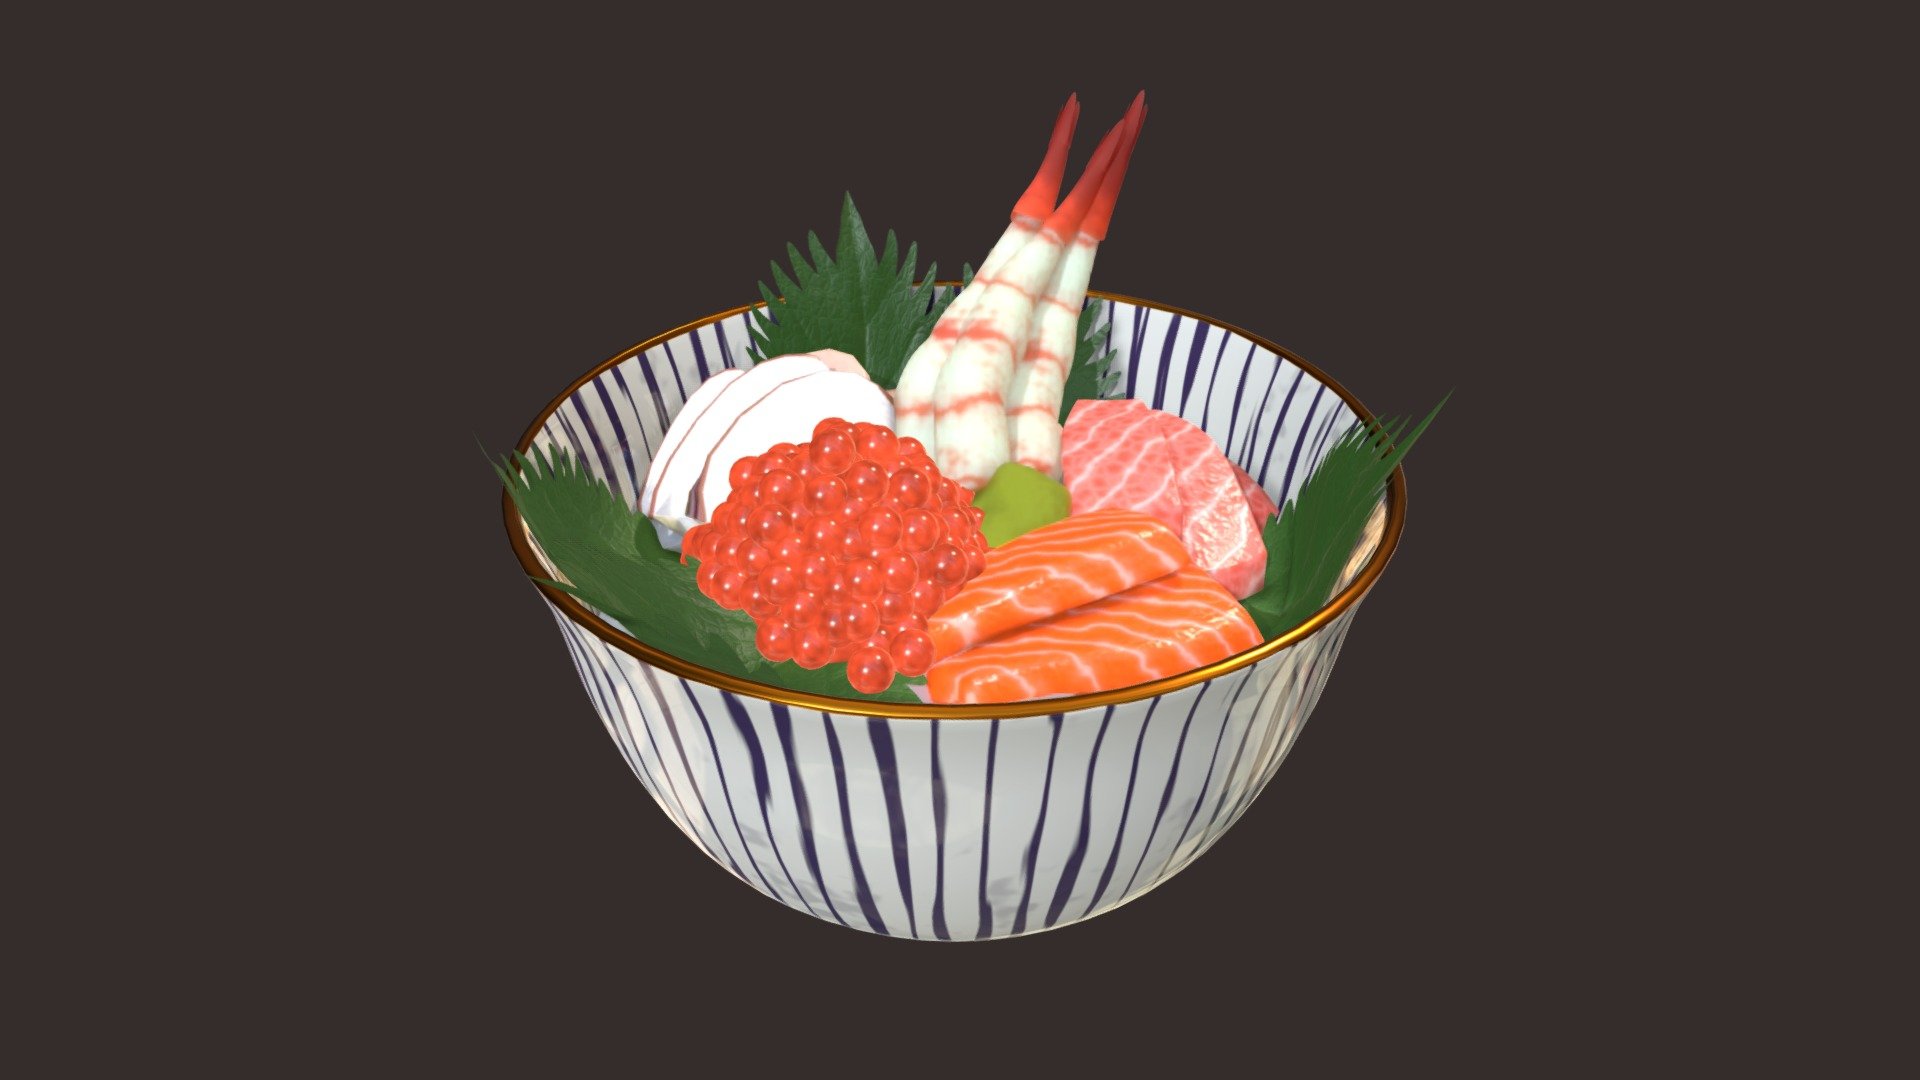 Bowl of sushi-rice with raw sea food on top （海鮮丼）
The textures are 100% Blender procedural 3d model